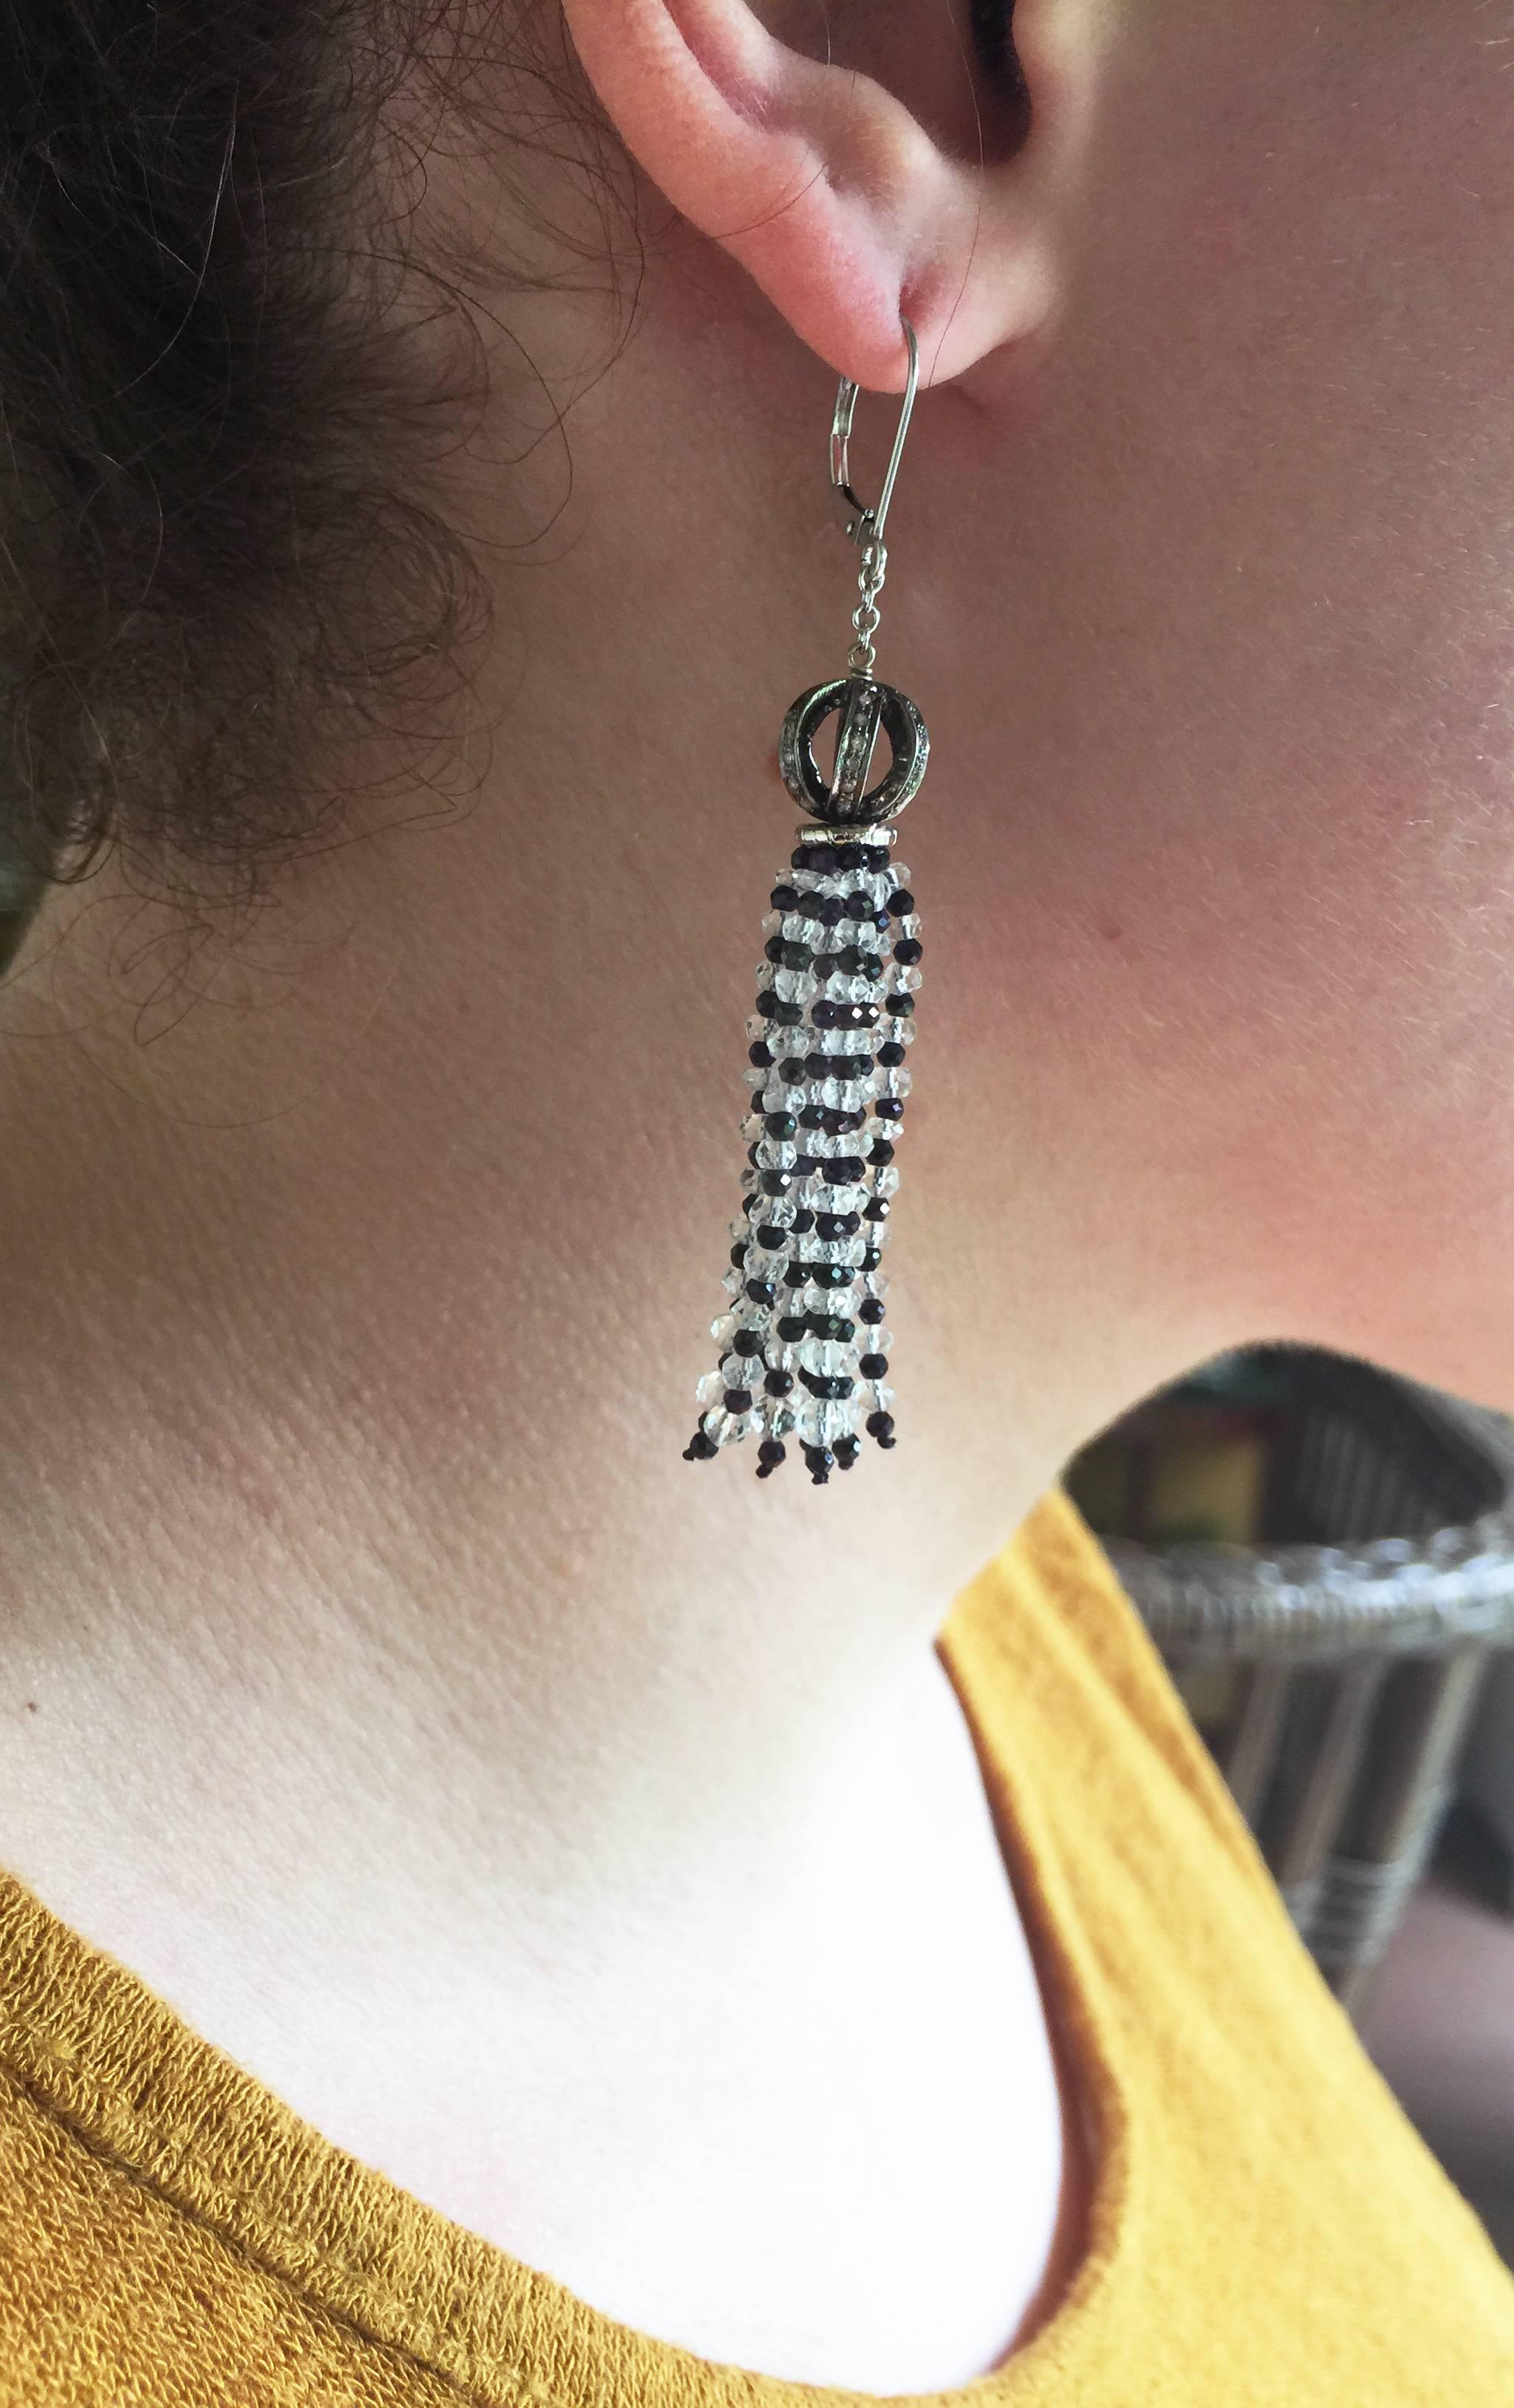 Diamond Encrusted Ball Earrings with Quartz and Black Spinel Tassels by Marina J 3